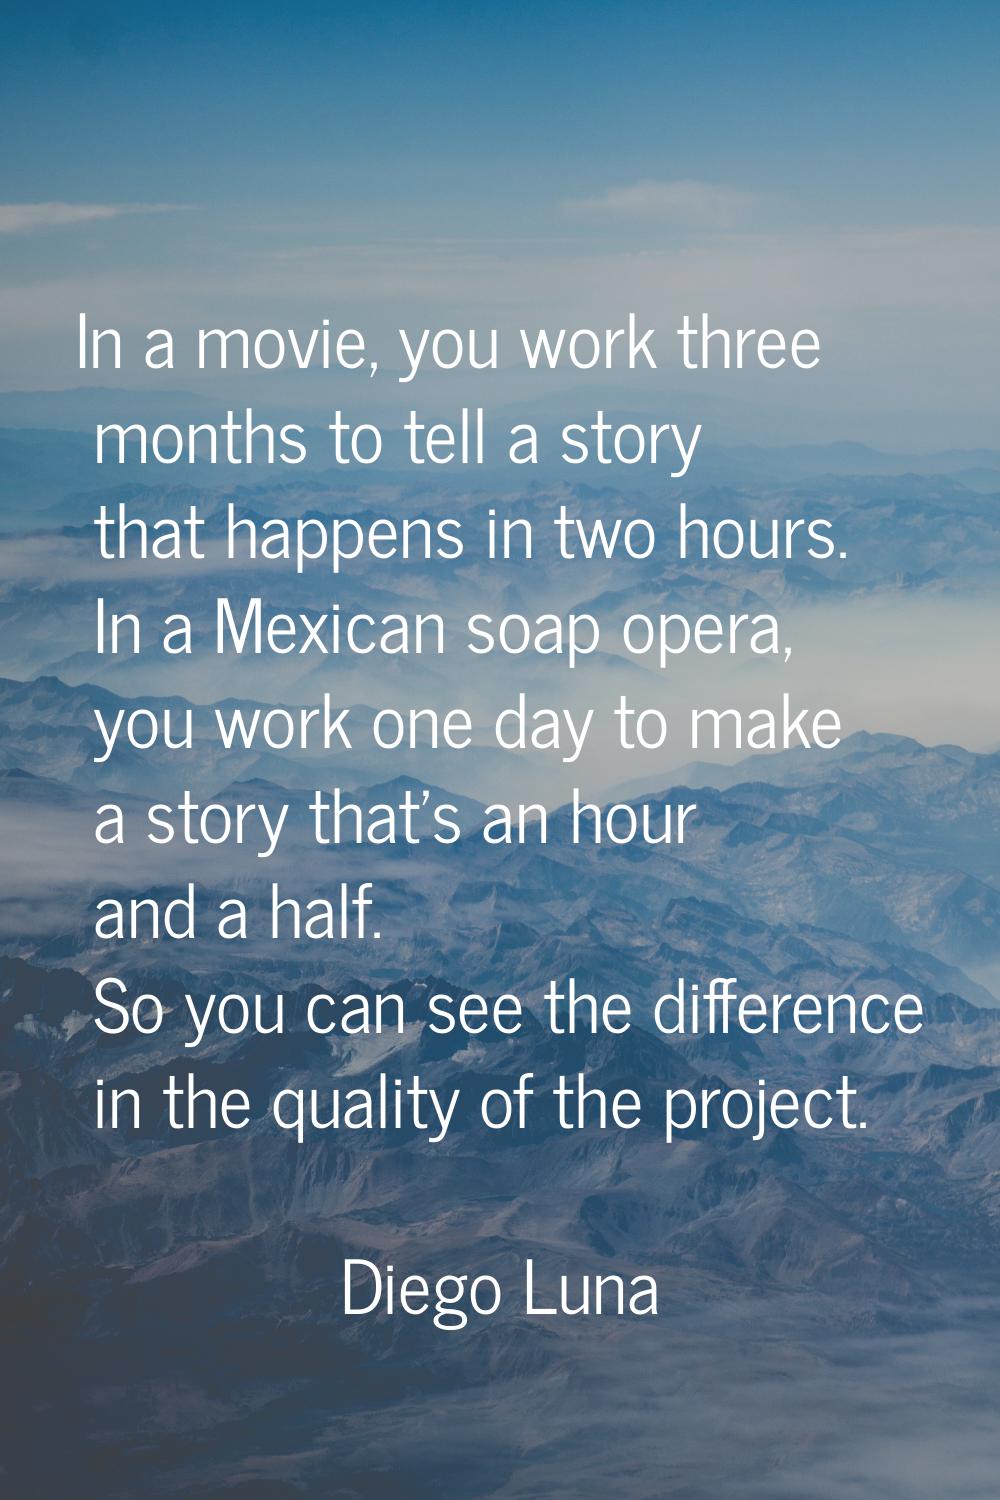 In a movie, you work three months to tell a story that happens in two hours. In a Mexican soap oper